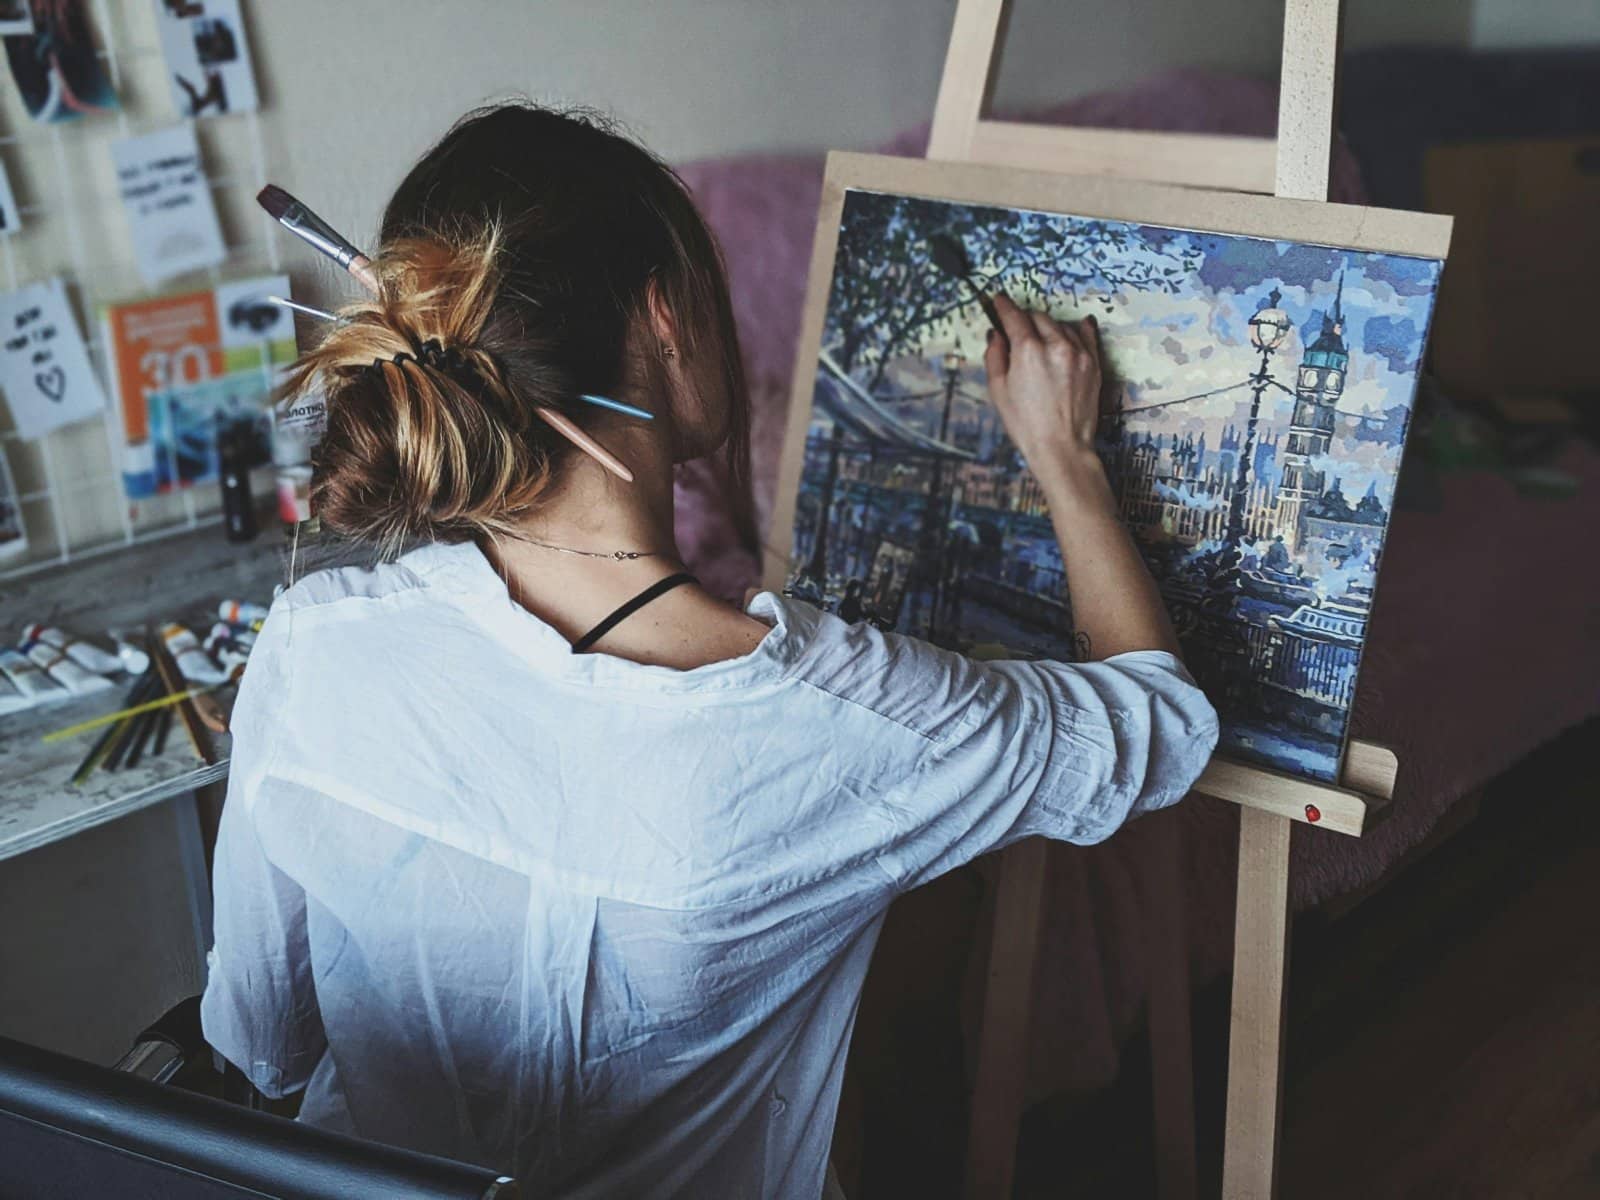 Image Credit: Pexels / Valeriia Miller <p>A gap year can also give students the time to focus on personal projects or hobbies. Whether it’s writing a book, creating new art, or starting a business, many students find that this period with limited responsibilities allows them to discover and pursue their passion projects.</p>